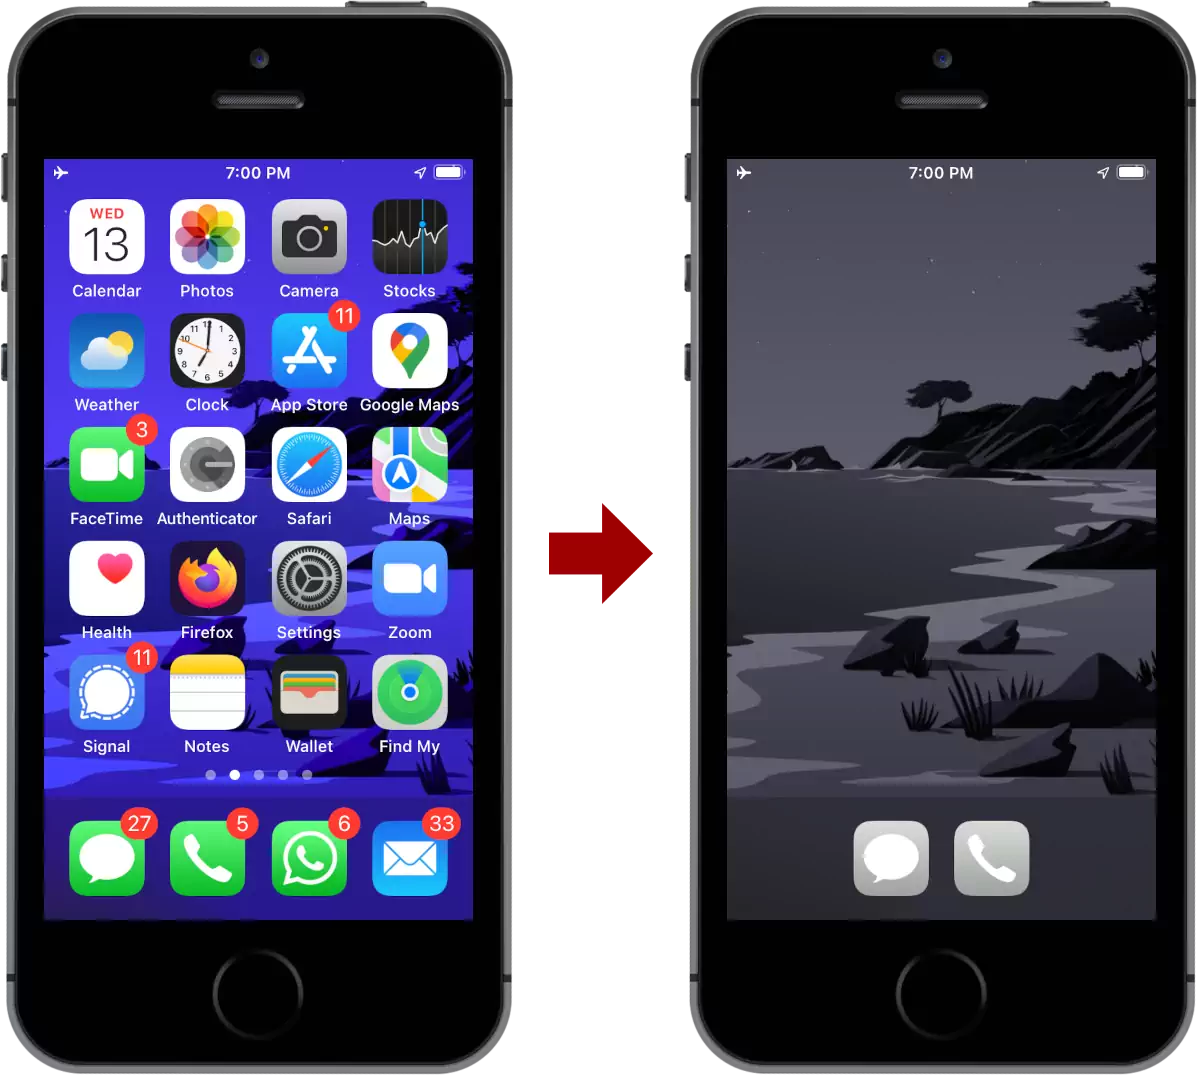 iPhone before the intervention (in colour, with many apps and notifications) versus after (in greyscale with no notifications and few apps).